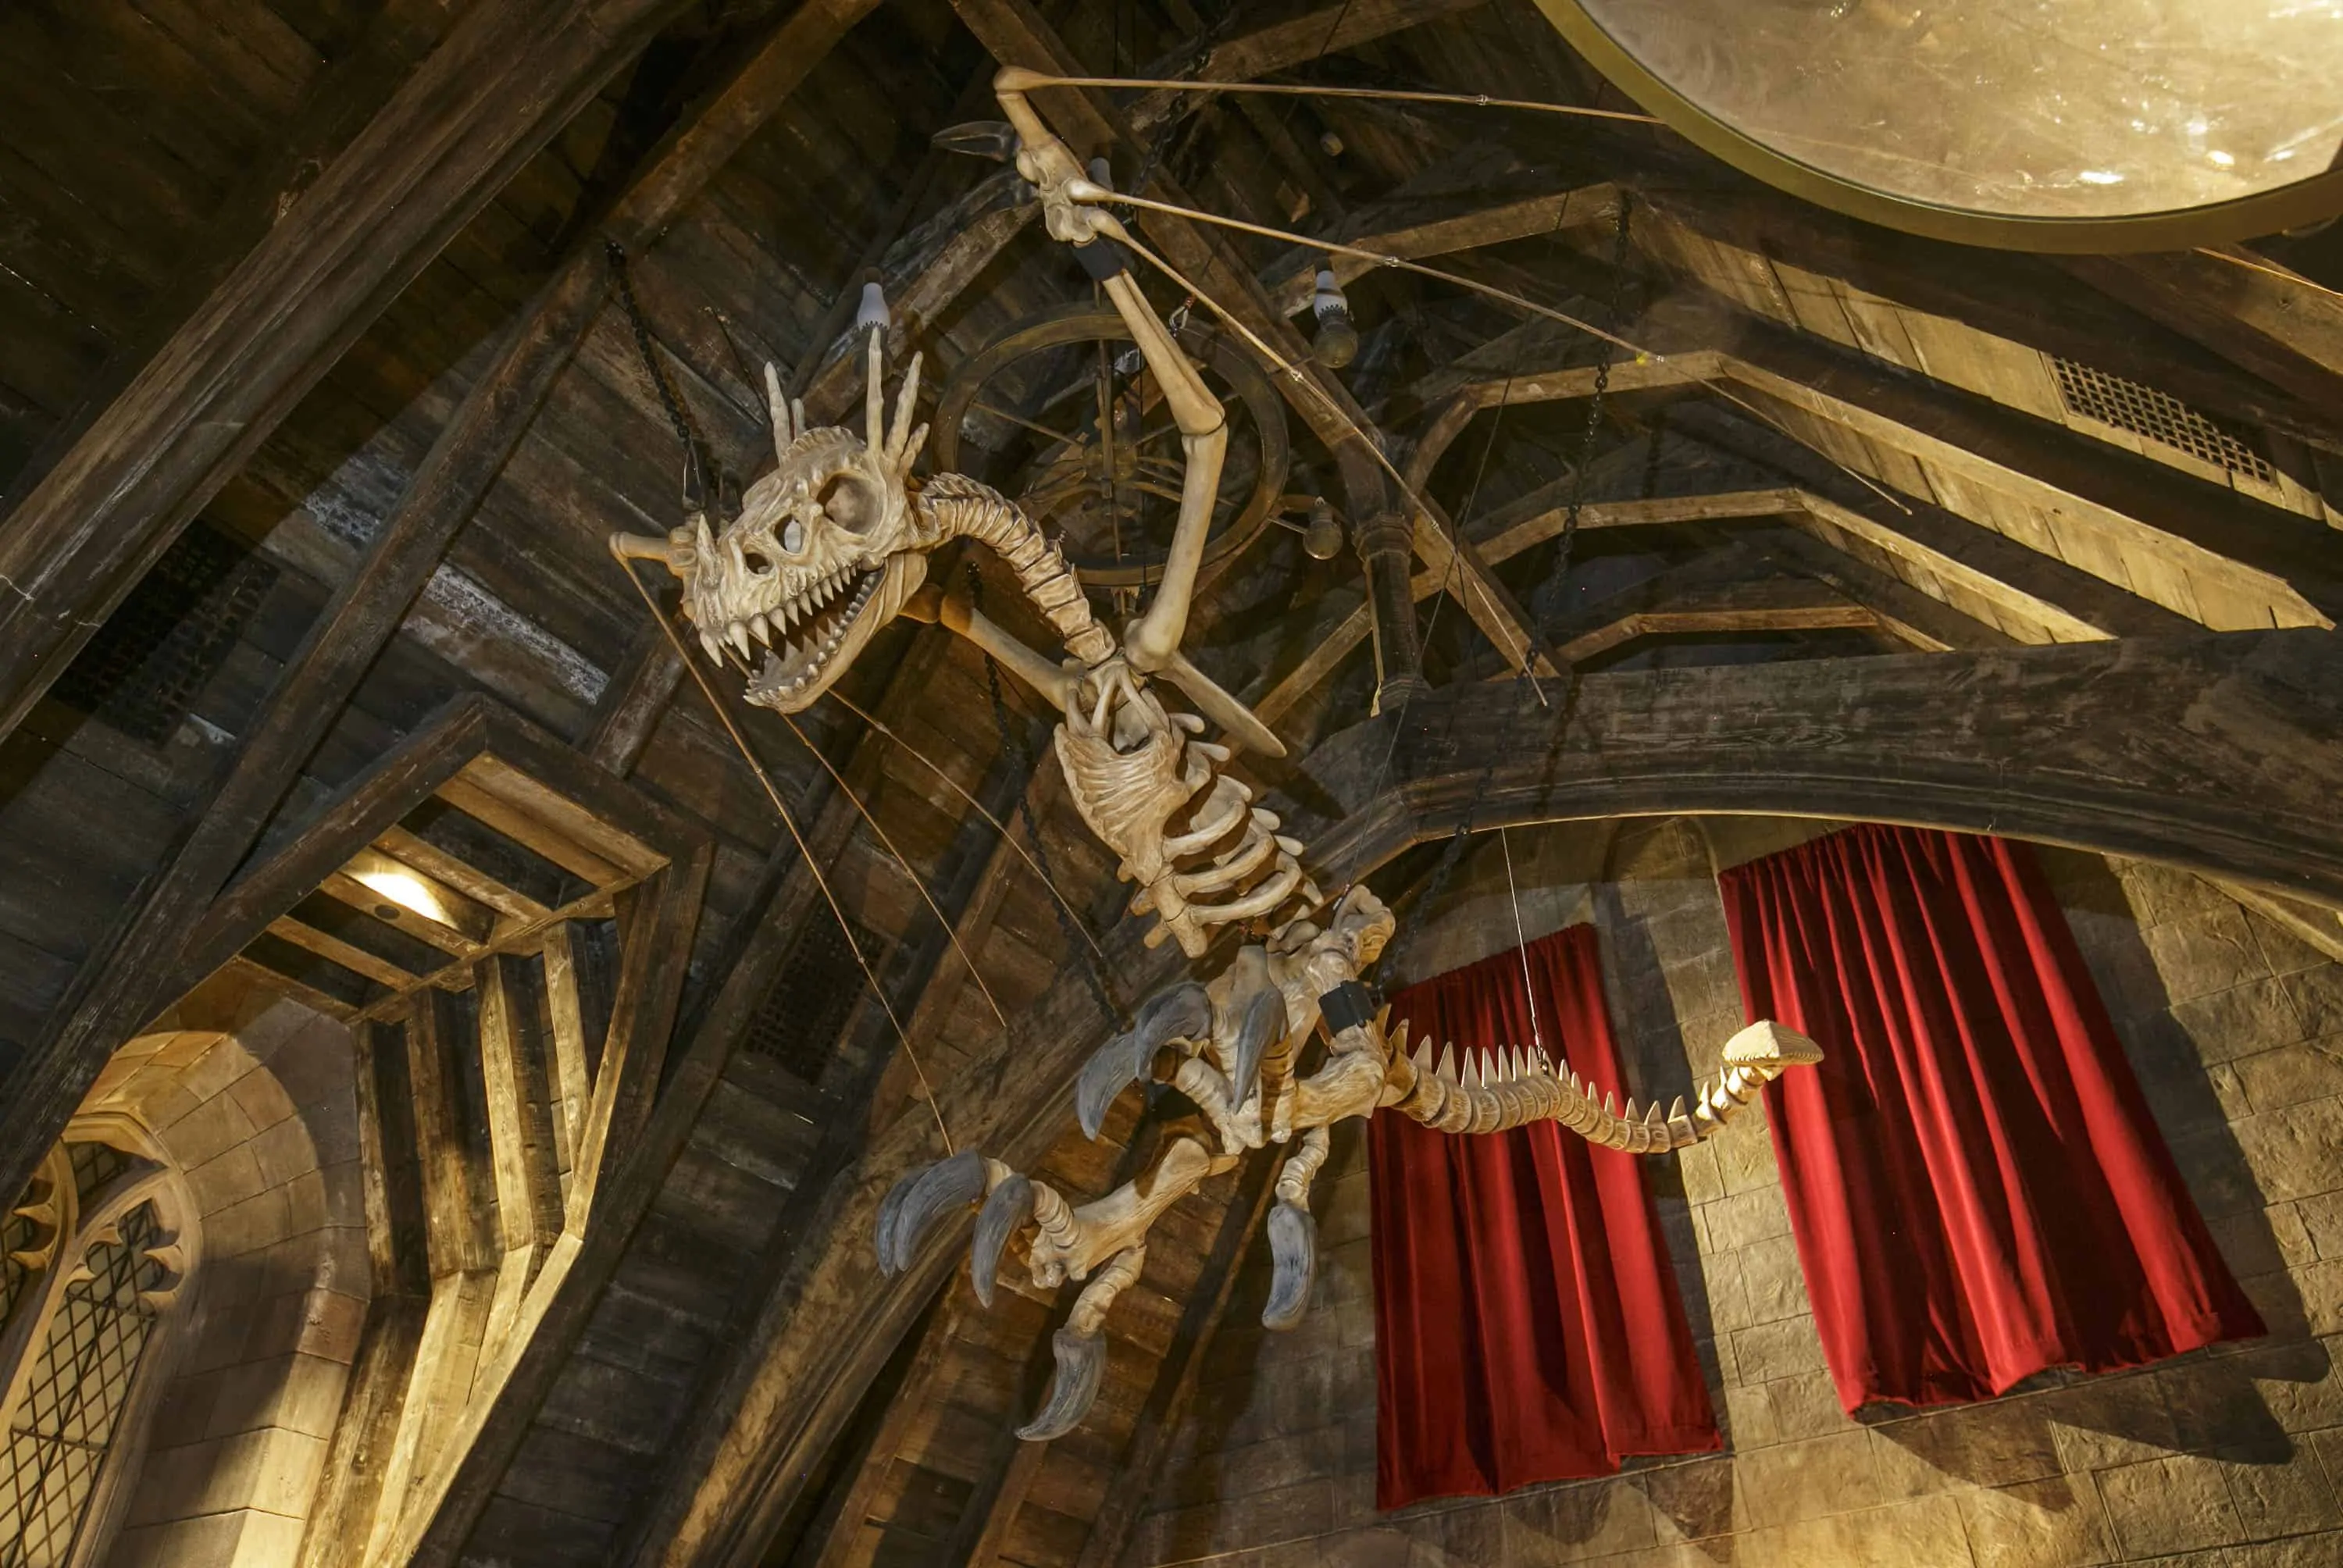 A dragon skeleton located inside the Defence Against the Dark Arts classroom within Hogwarts castle